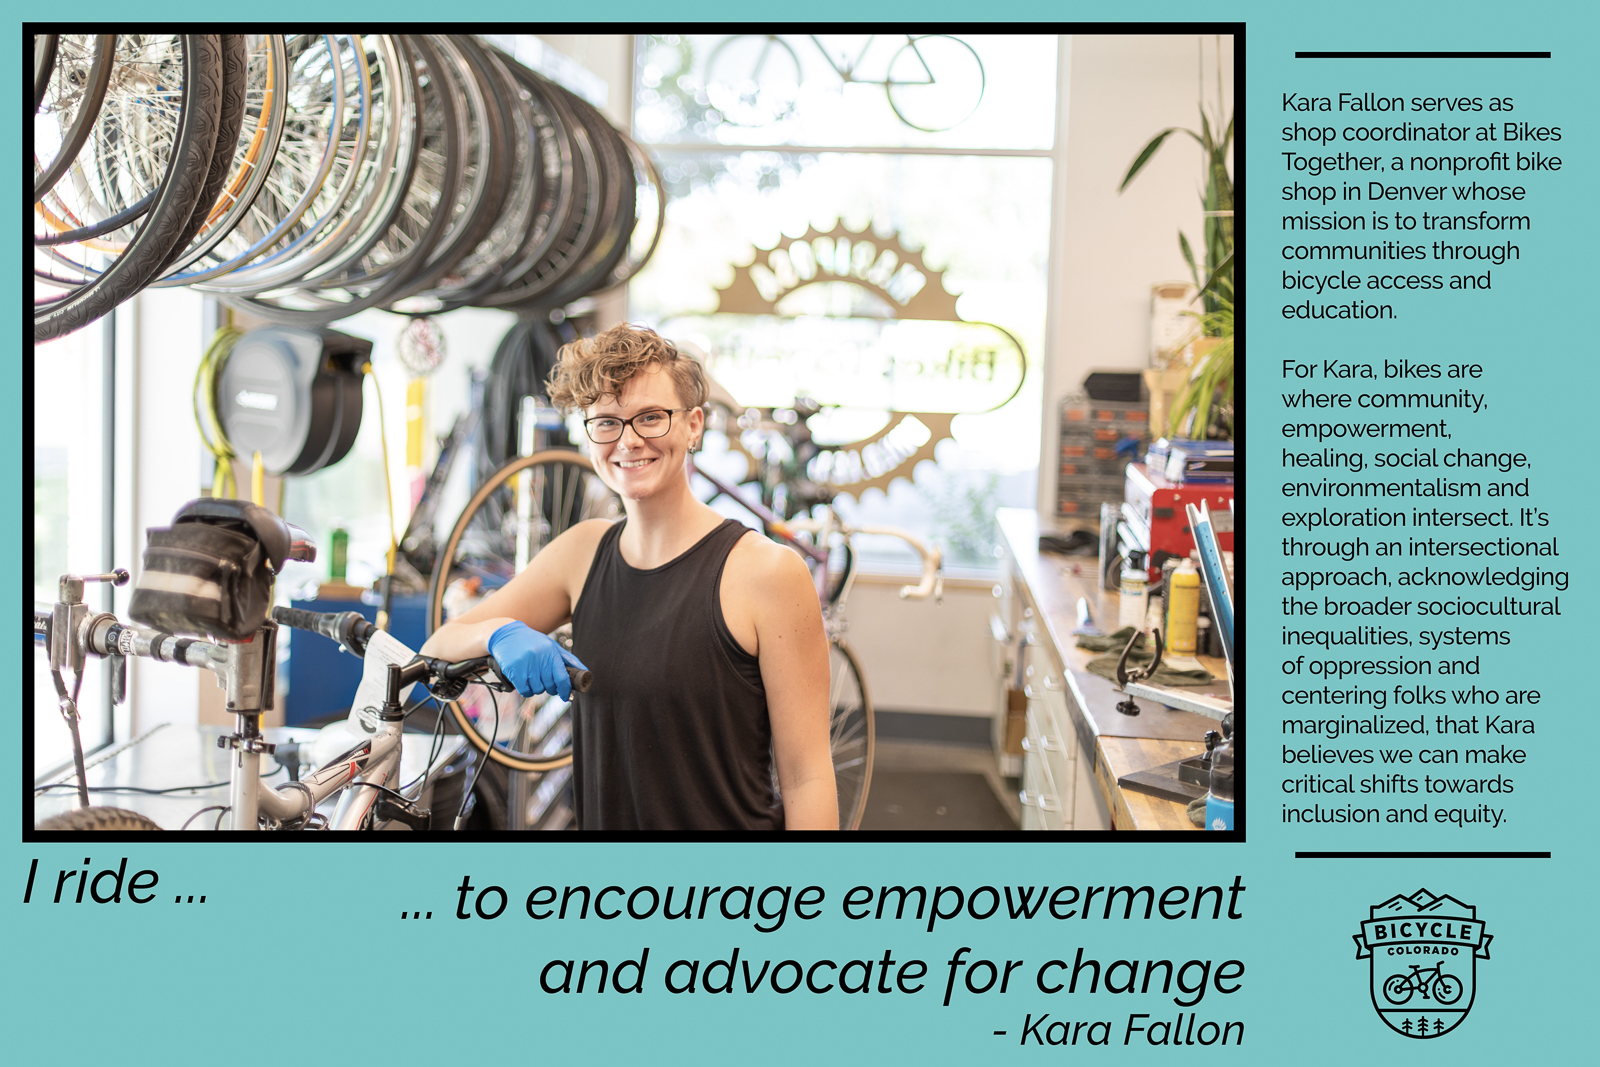 A "why I ride" graphic of Kara Fallon, posing in a bike mechanic shop. The text reads "I ride to encourage empowerment and advocate for change. Kara Fallon serves as shop coordinator at Bikes Together, a nonprofit bike shop in Denver whose mission is to transform communities through bicycle access and education. For Kara, bikes are where community, empowerment, healing, social change, environmentalism and exploration intersect. It's through an intersectional approach, acknowledging the braoder sociocultural inequalities, systems of oppression and centering folks who are marginalized, that Kara believes we can make critical shifts towards inclusion and equity."